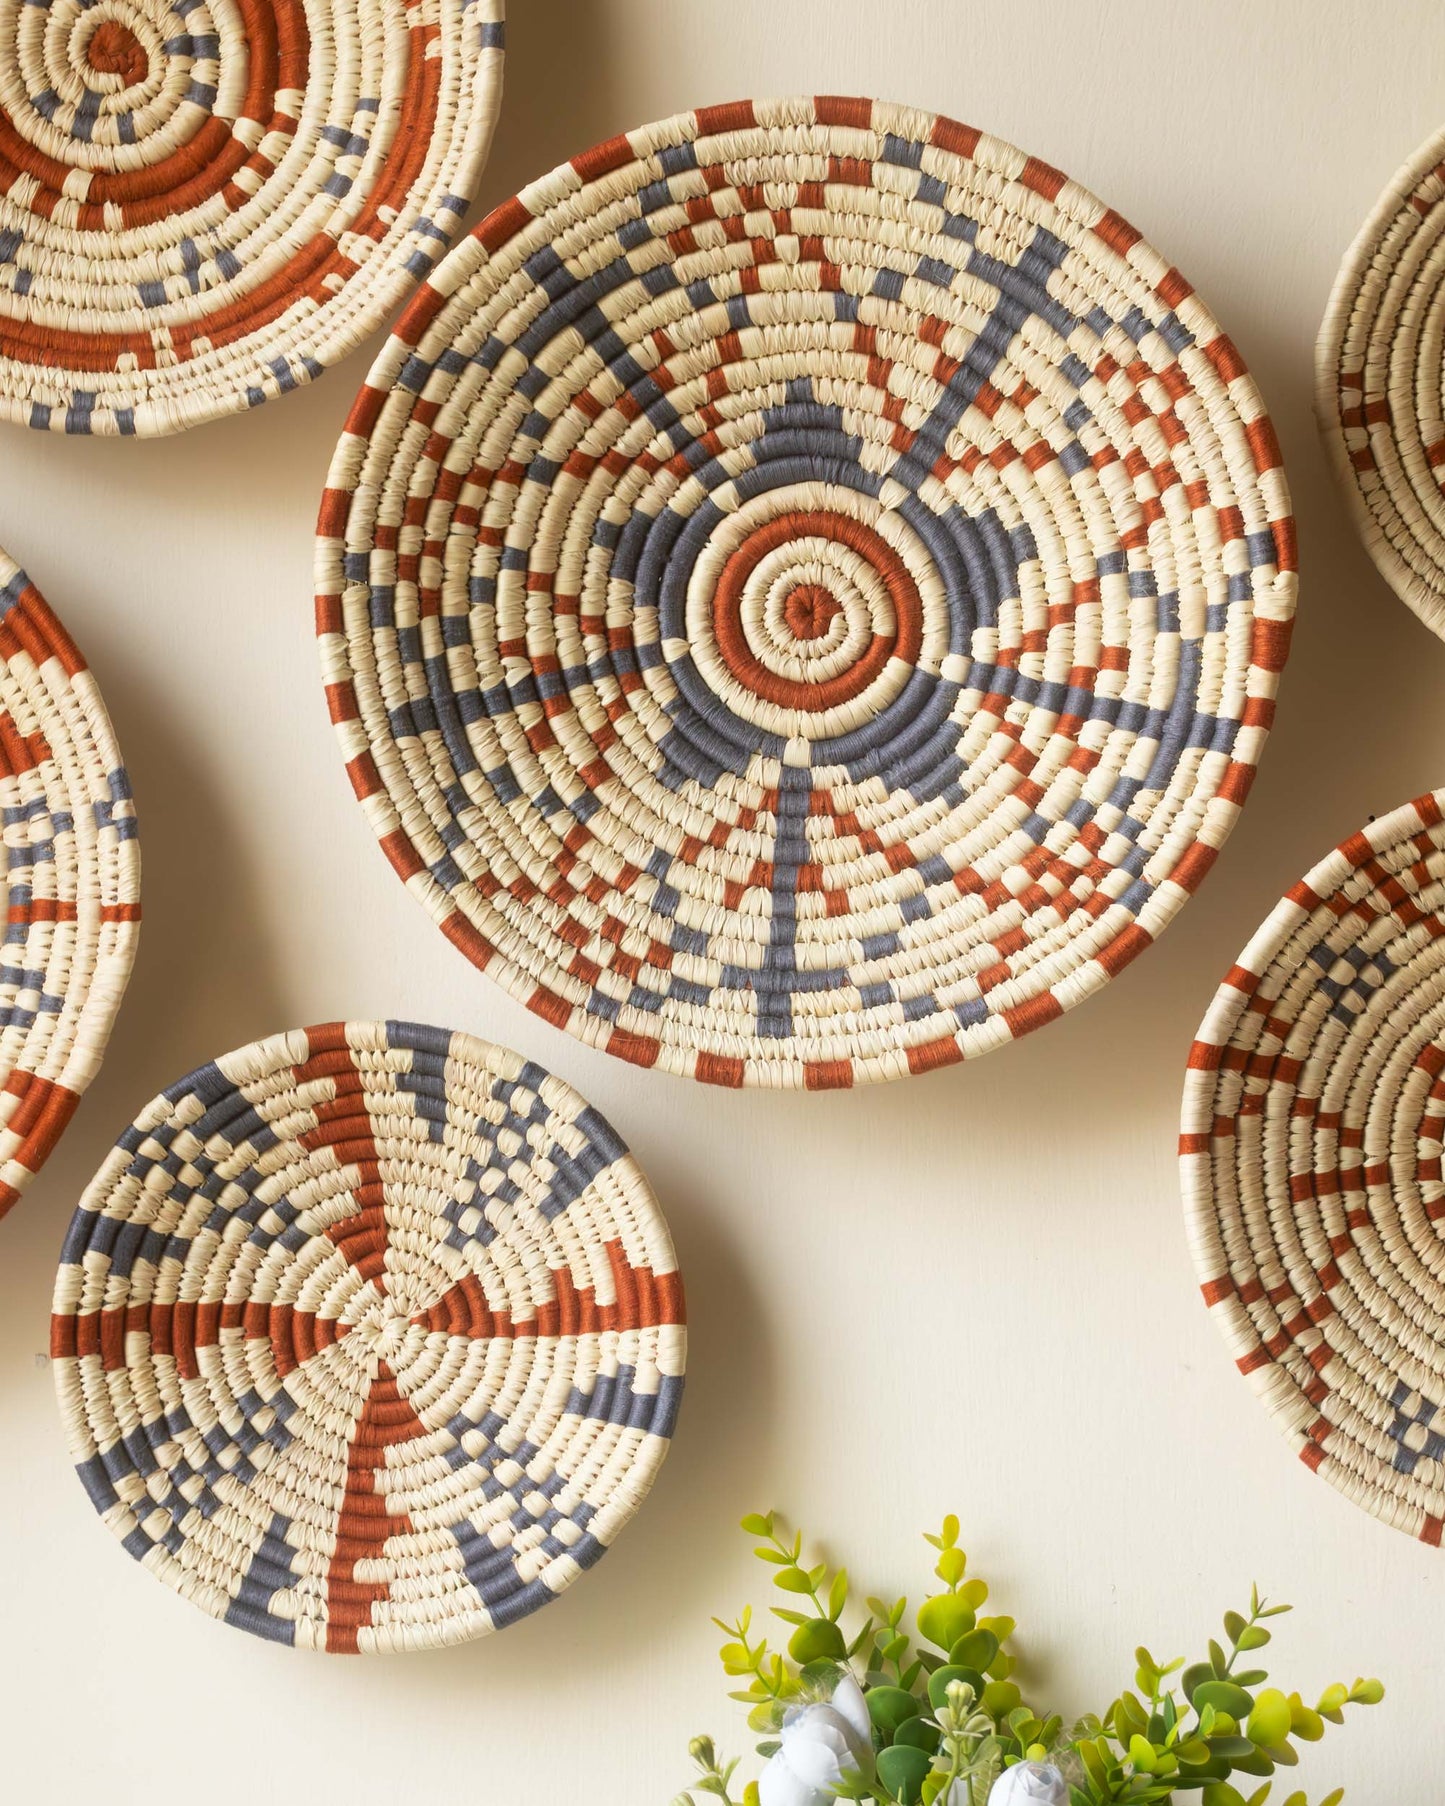 Woven Nomad Set of Six Wall Baskets